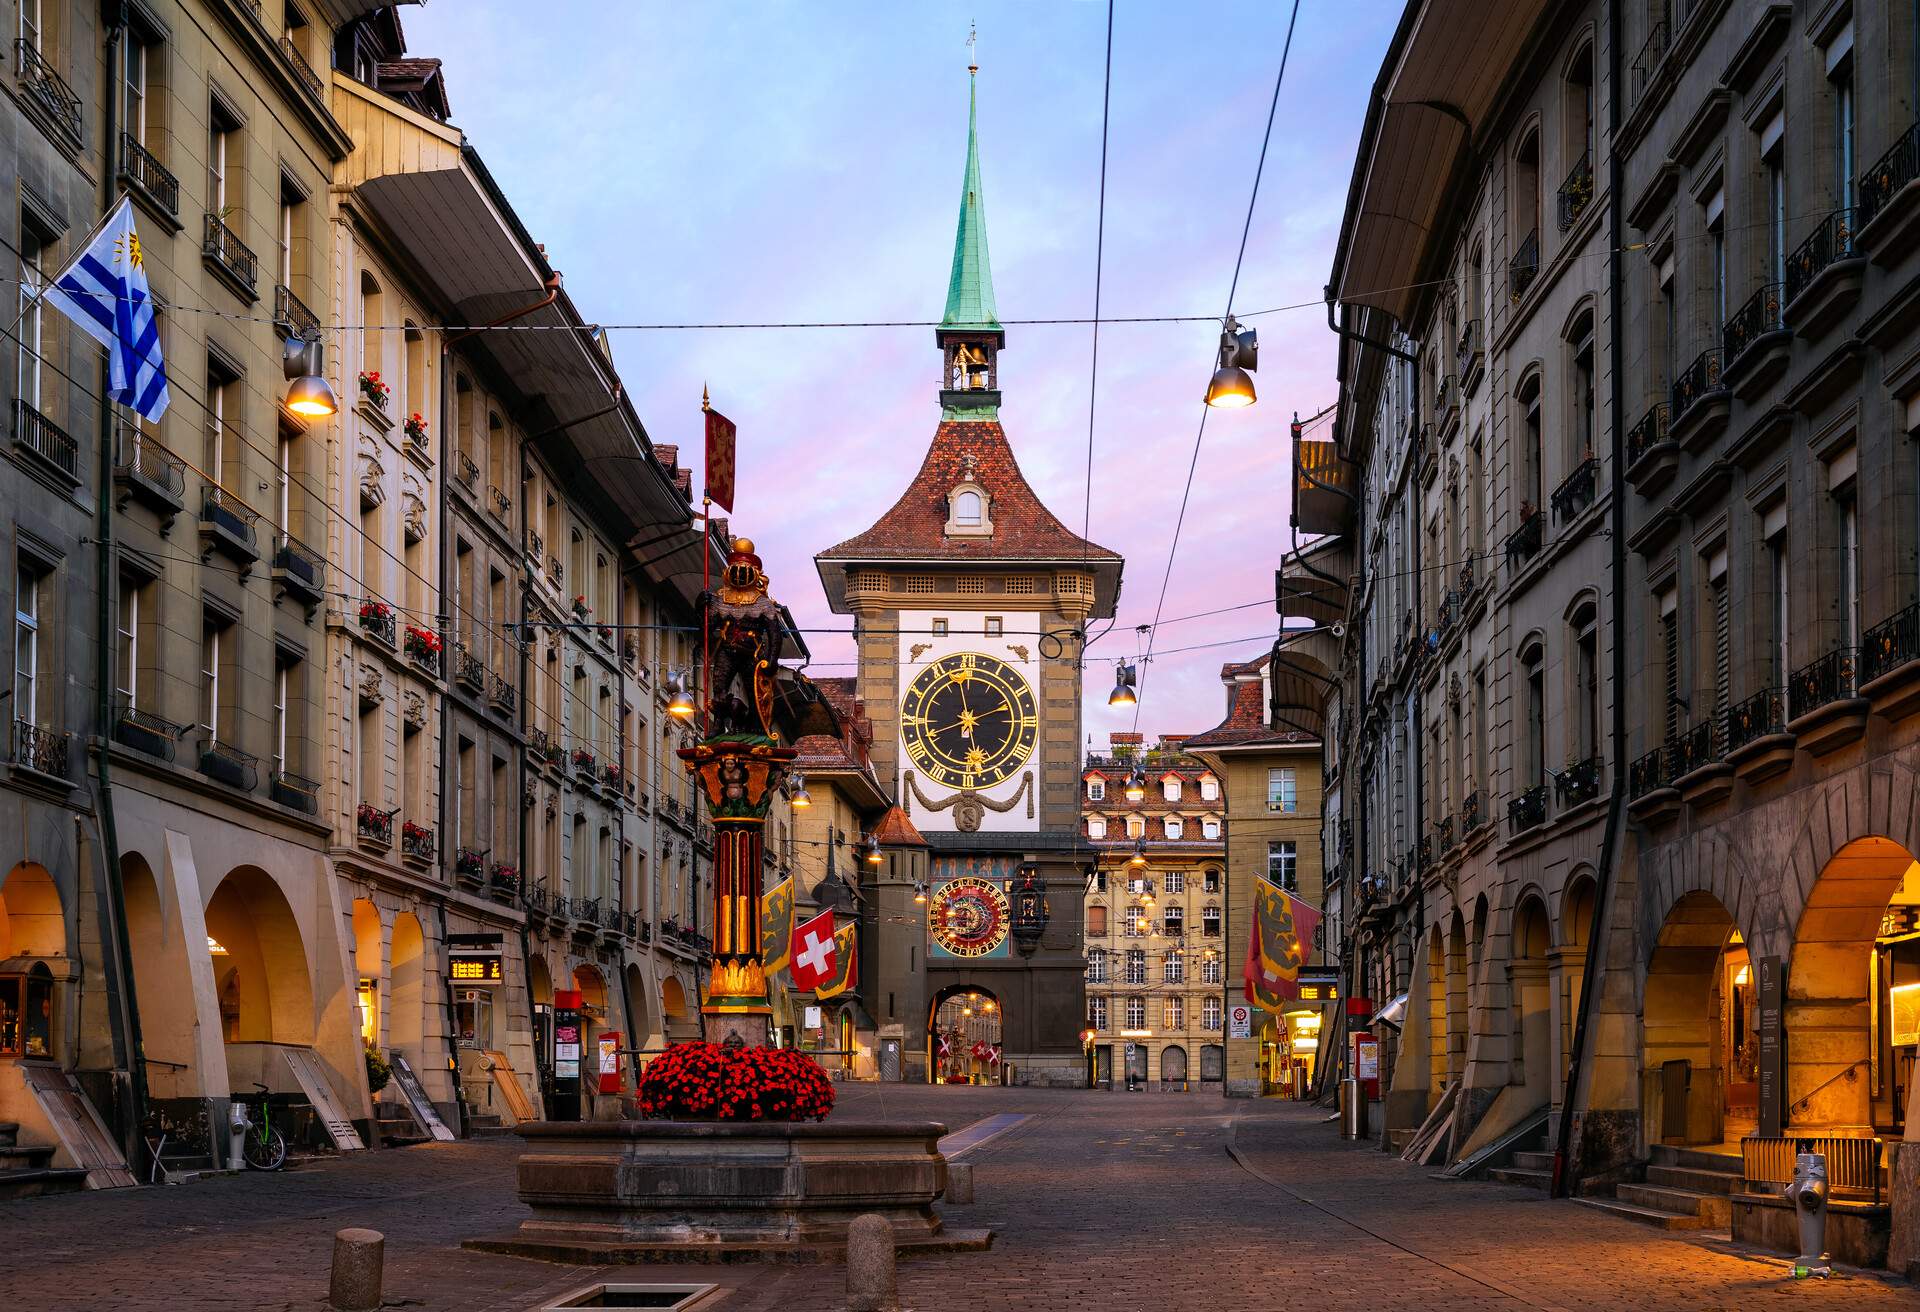 The famous Zytglogge, Astronomical Clock in Altstadt (Old Town) of Bern, the capital of Switzerland. This photograph was taken at sunrise along Kramgrasse Street